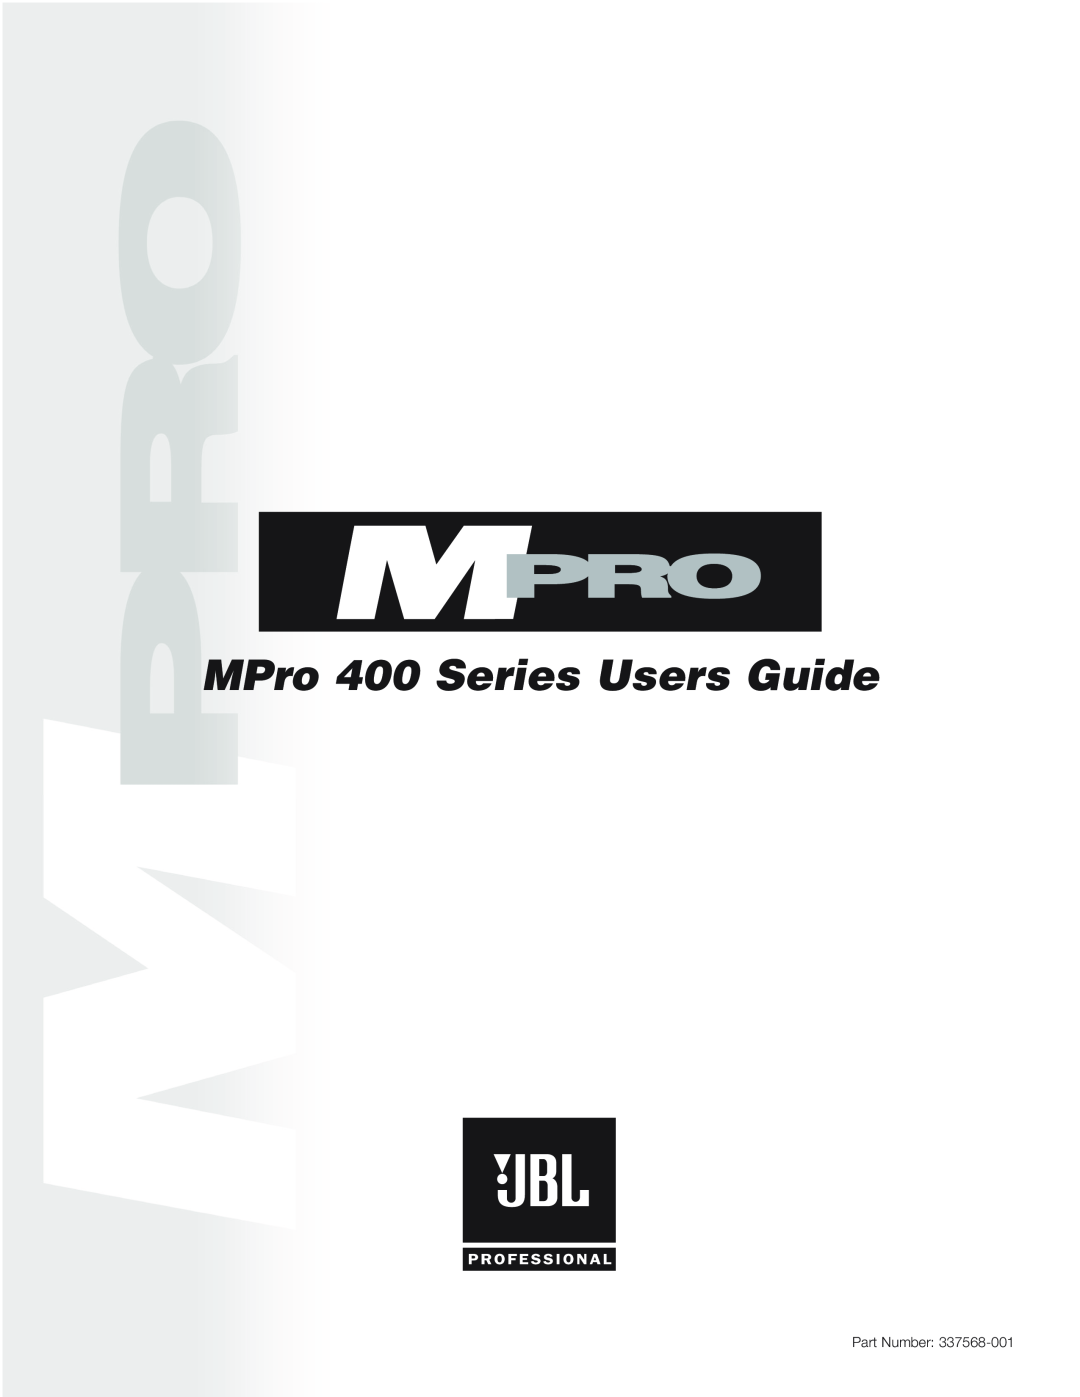 JBL manual MPro 400 Series Users Guide, Part Number 